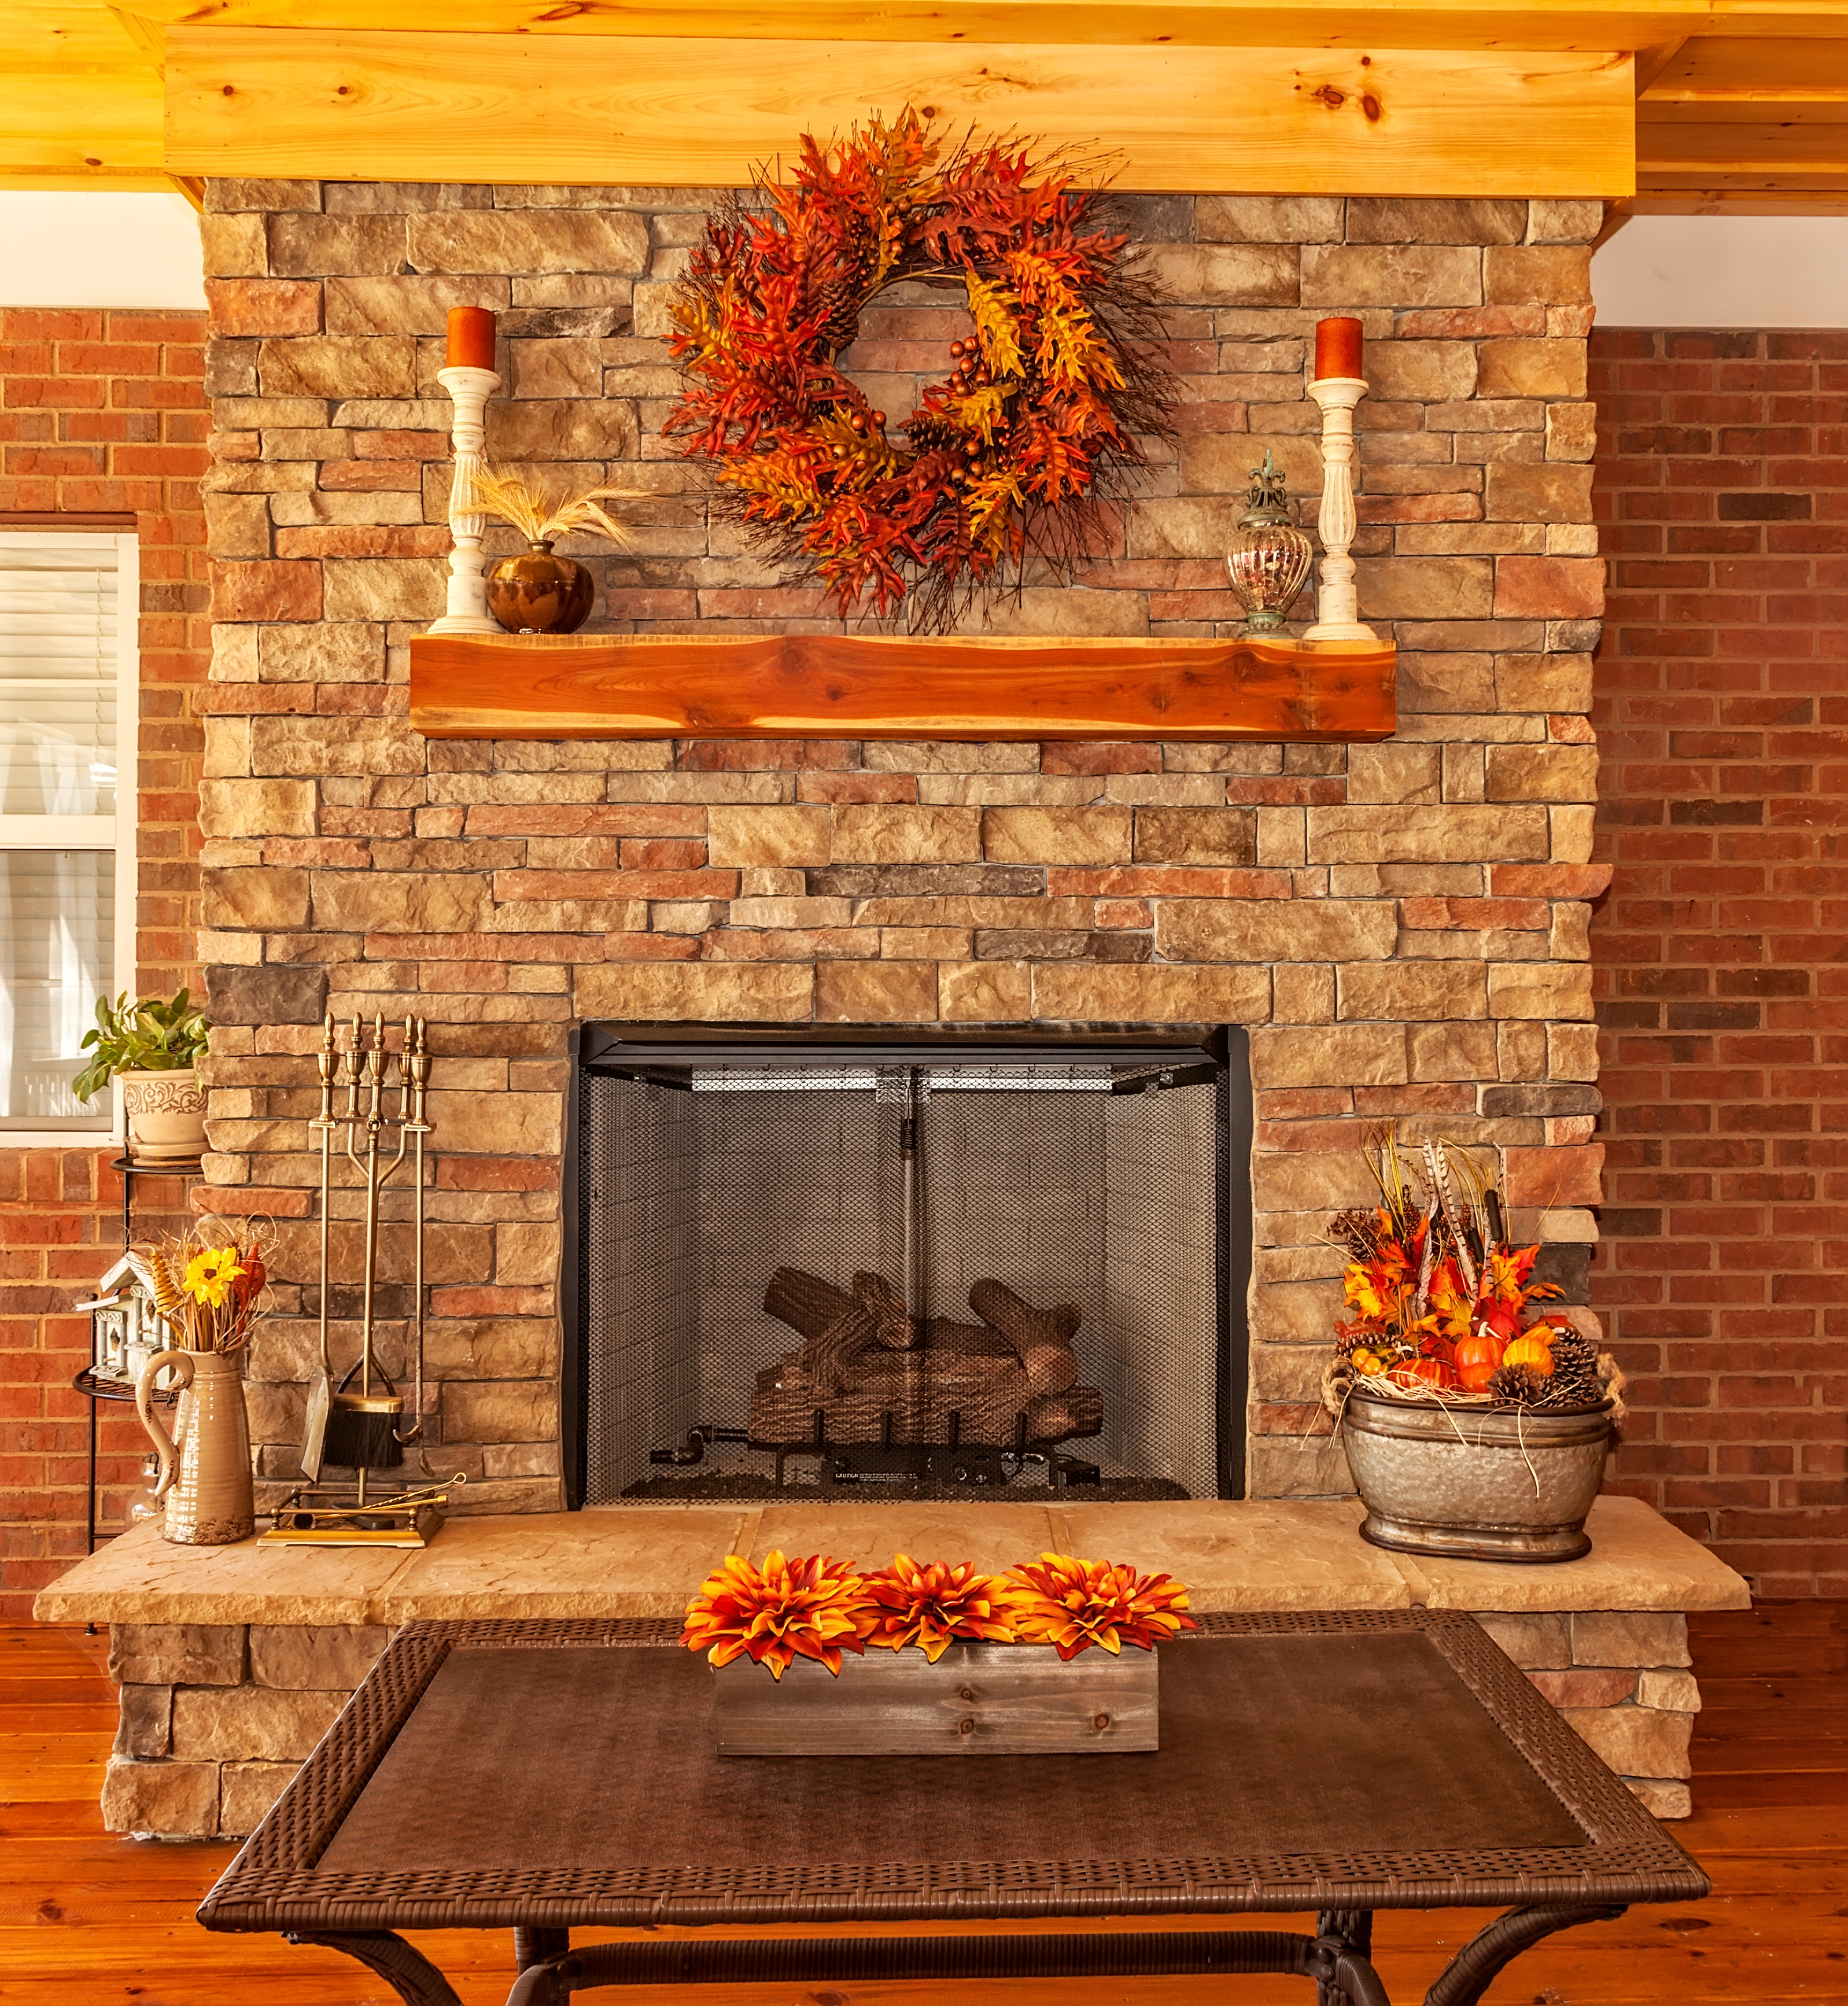 5 Fall Mantel Decorating Ideas That'll Make You Look Like a Pro 10